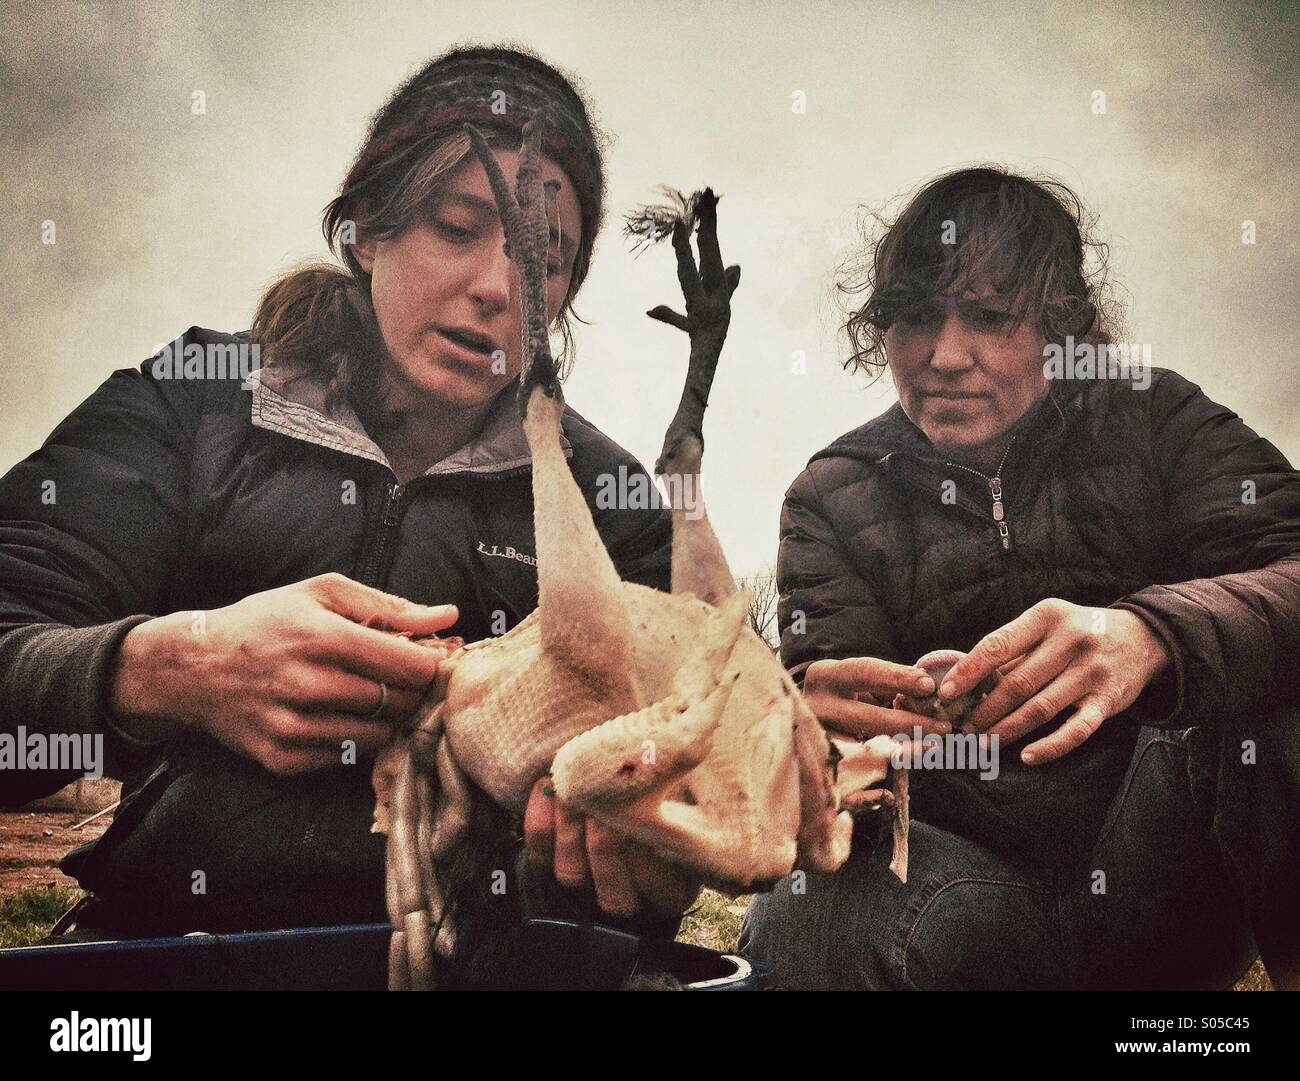 Natali Day and Claire Appel butchering a chicken Stock Photo